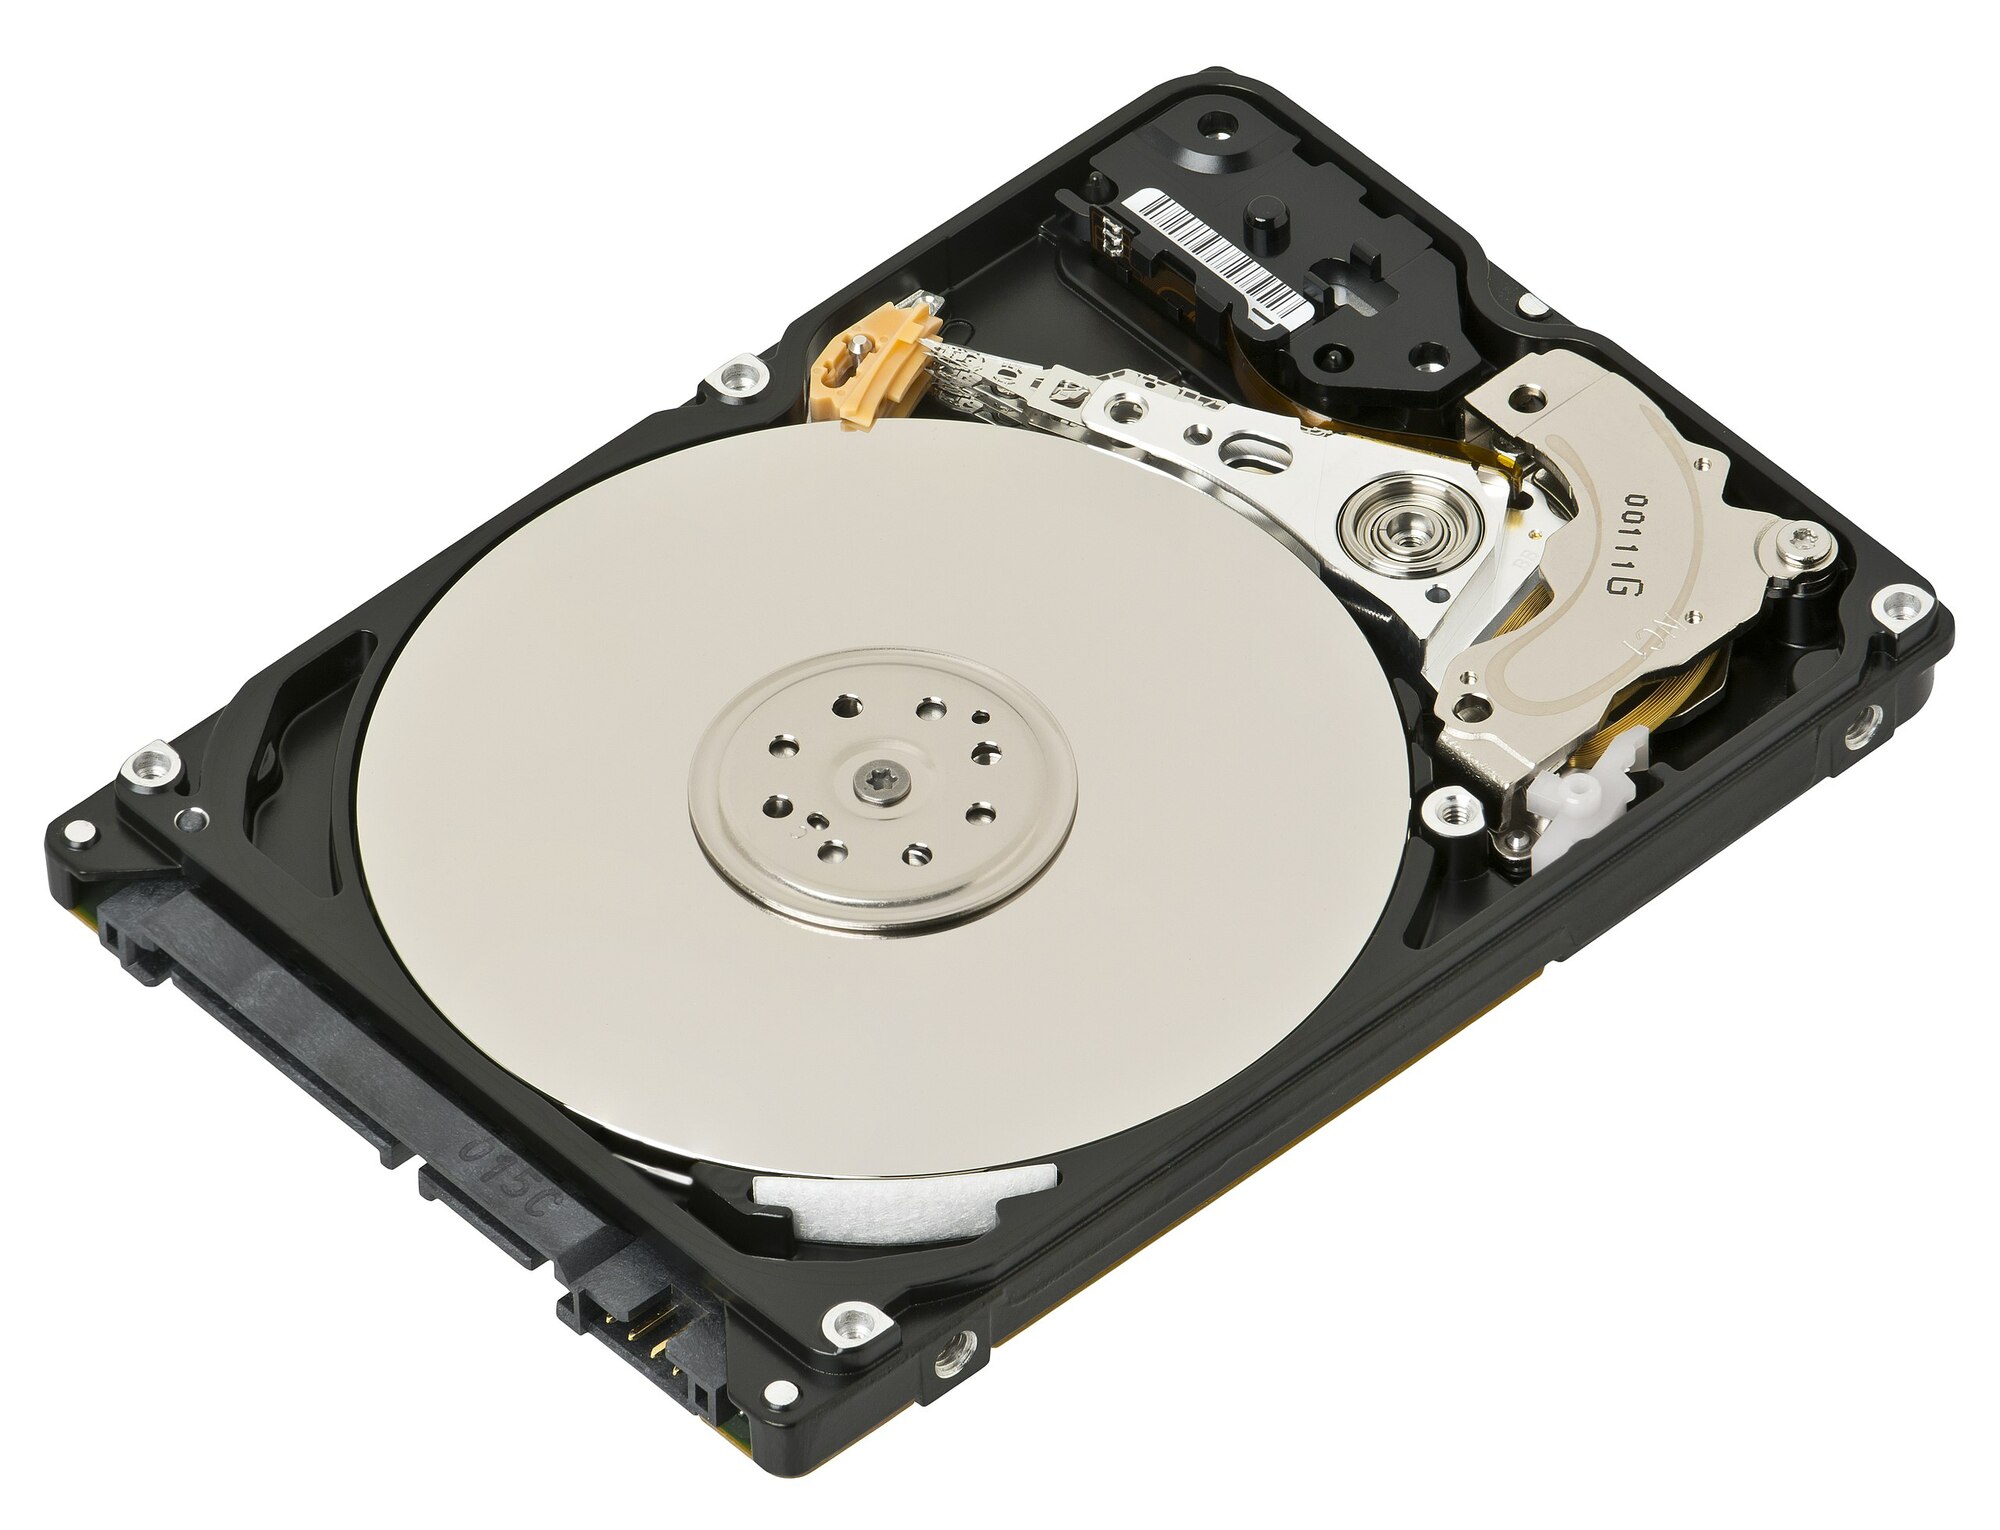 Image of inside a hard drive, showing the disk and and the arm that reads its data.